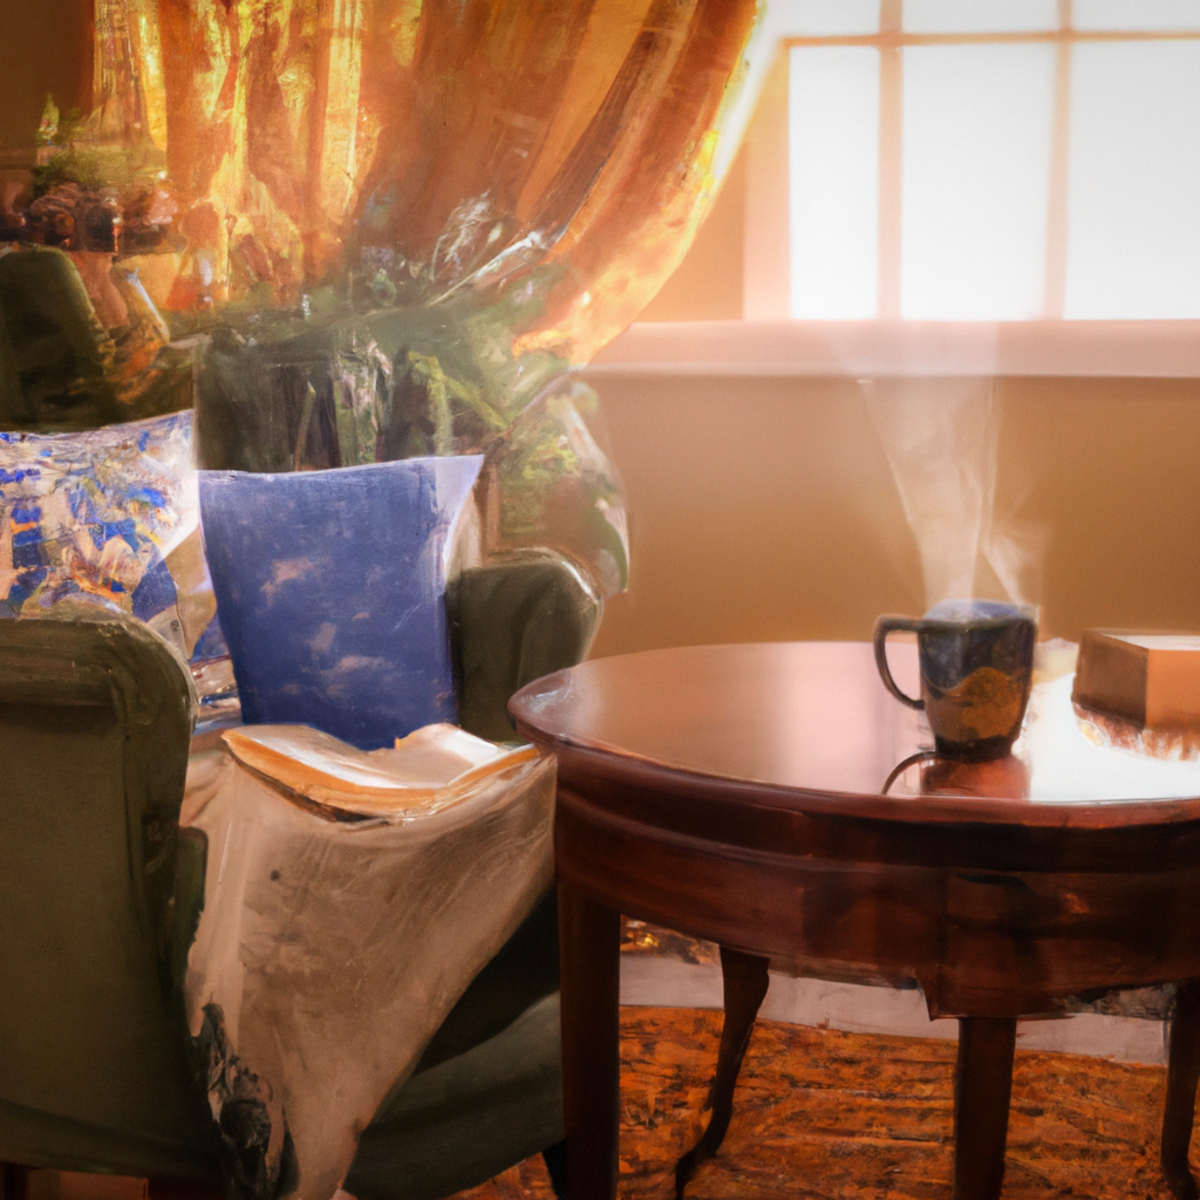 Cozy living room with plush armchair, warm blanket, herbal tea, books, salt lamp, and waterfall fountain promotes relaxation and stress reduction.